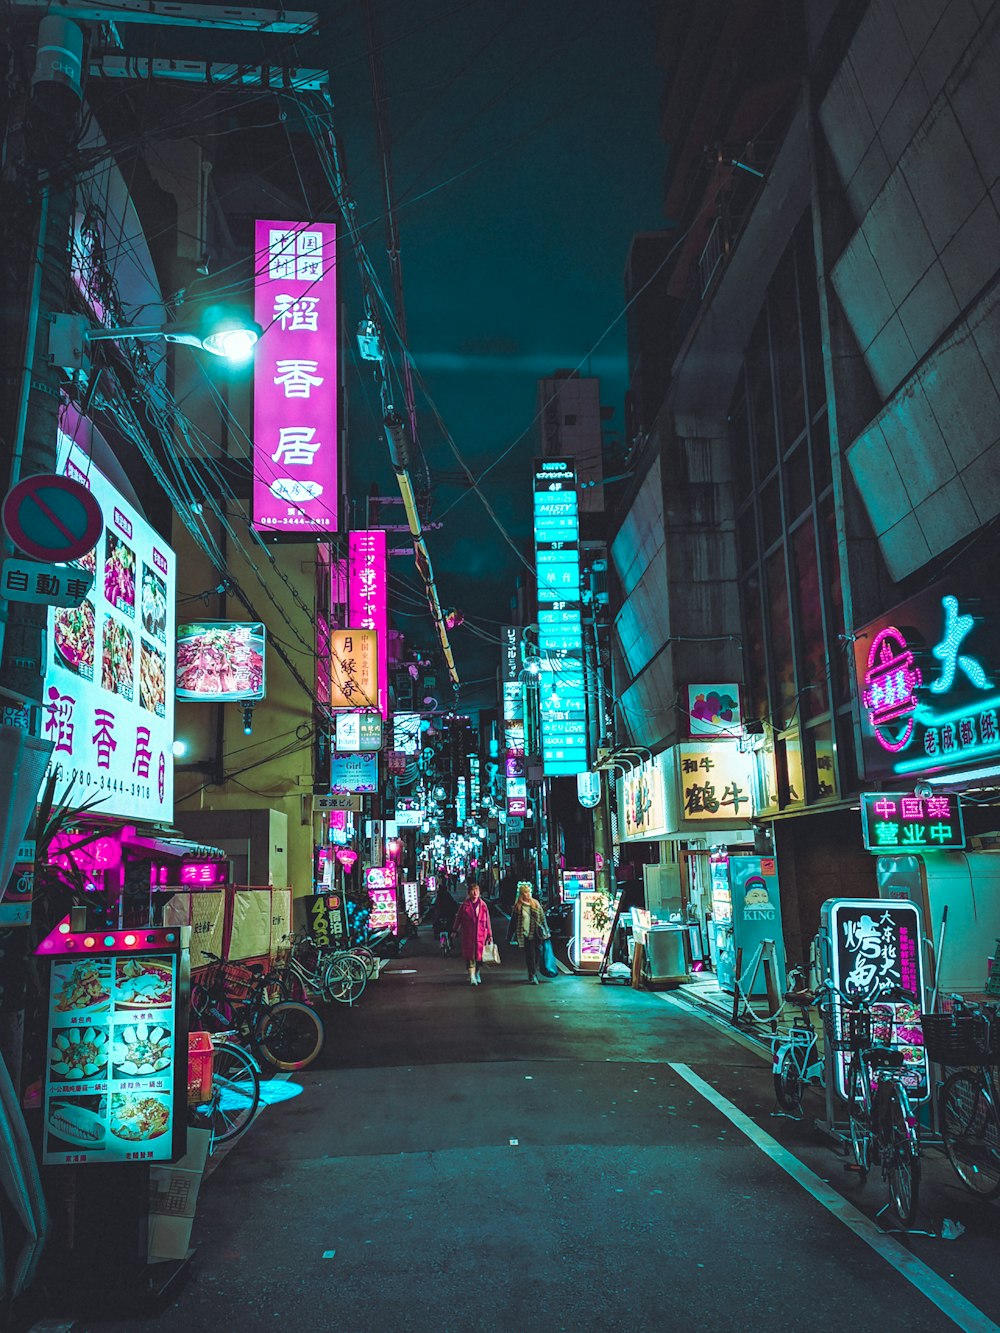 500 Neon City Pictures Download Free Images On Unsplash - roblox city background